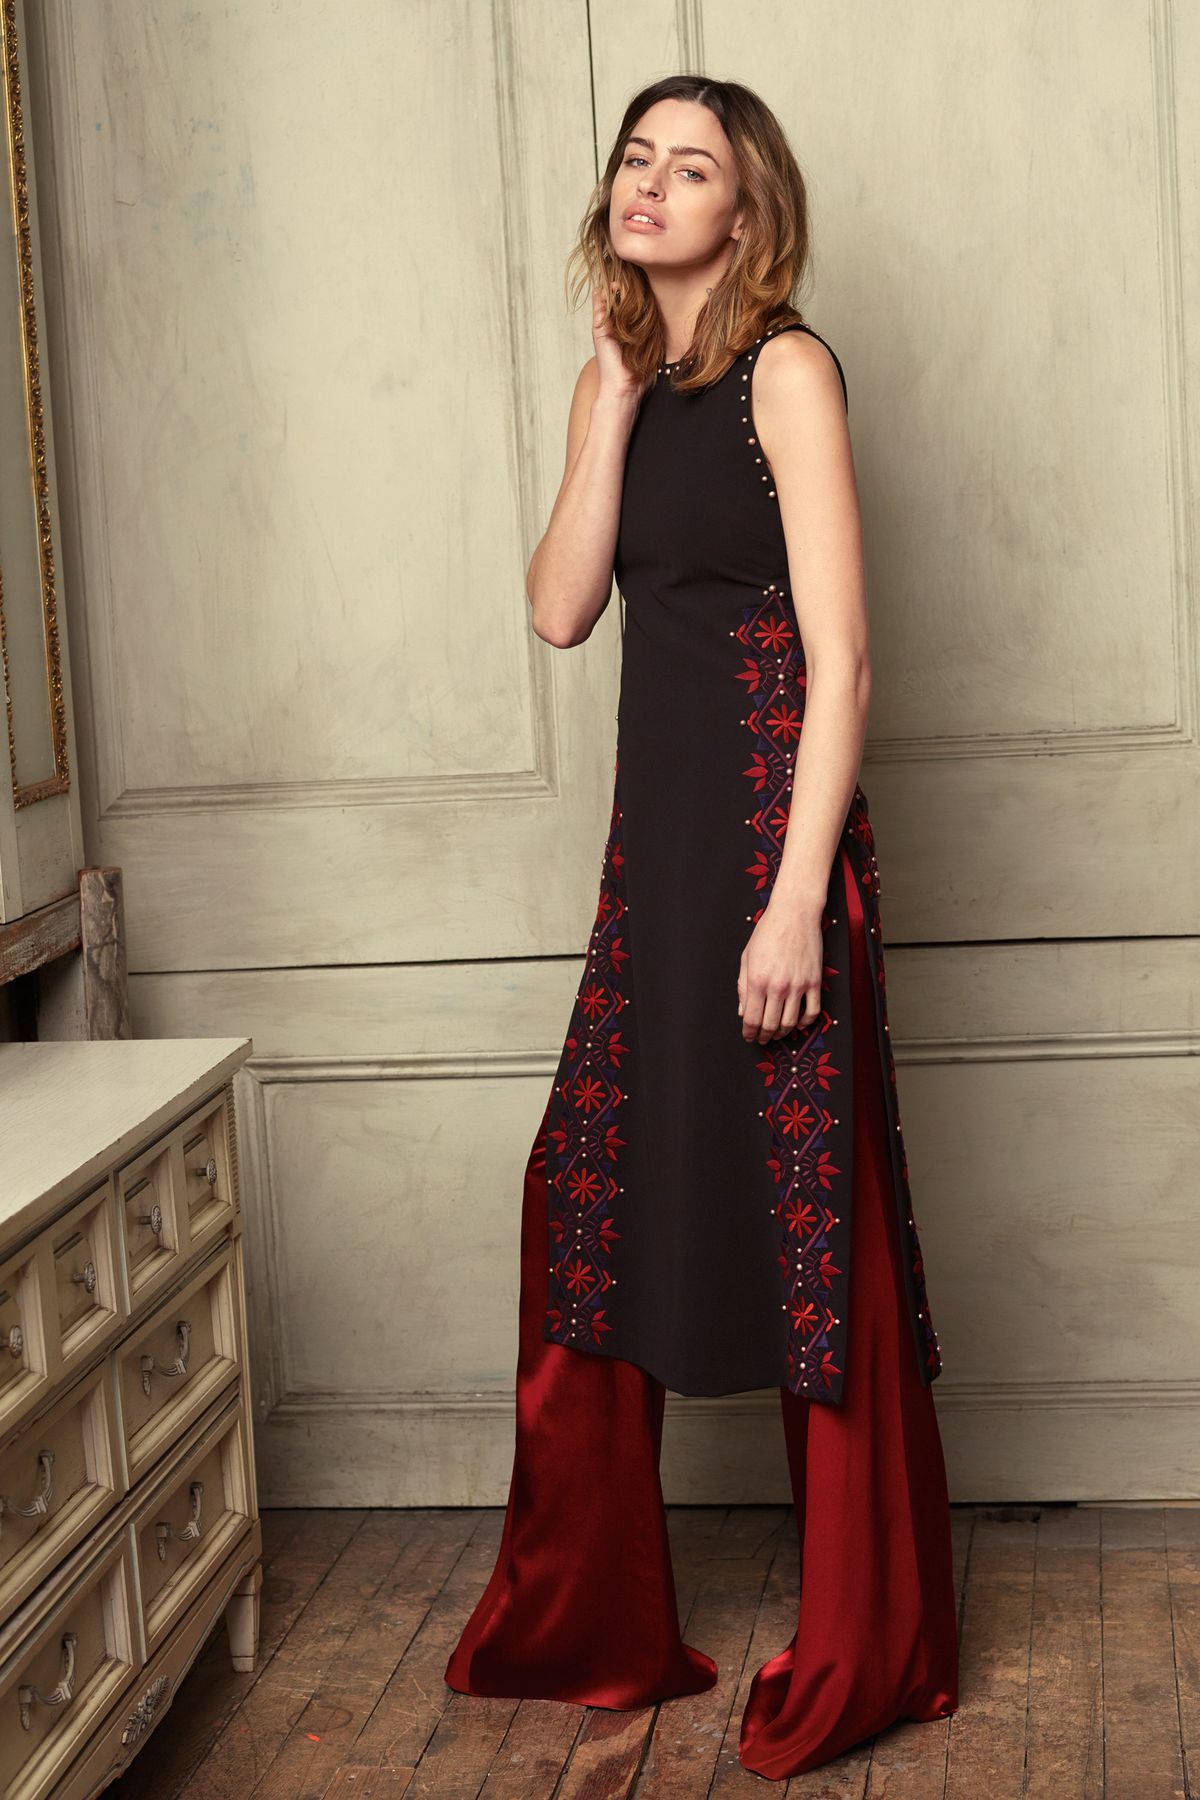 A model wearing red pants and a black sleeveless dress